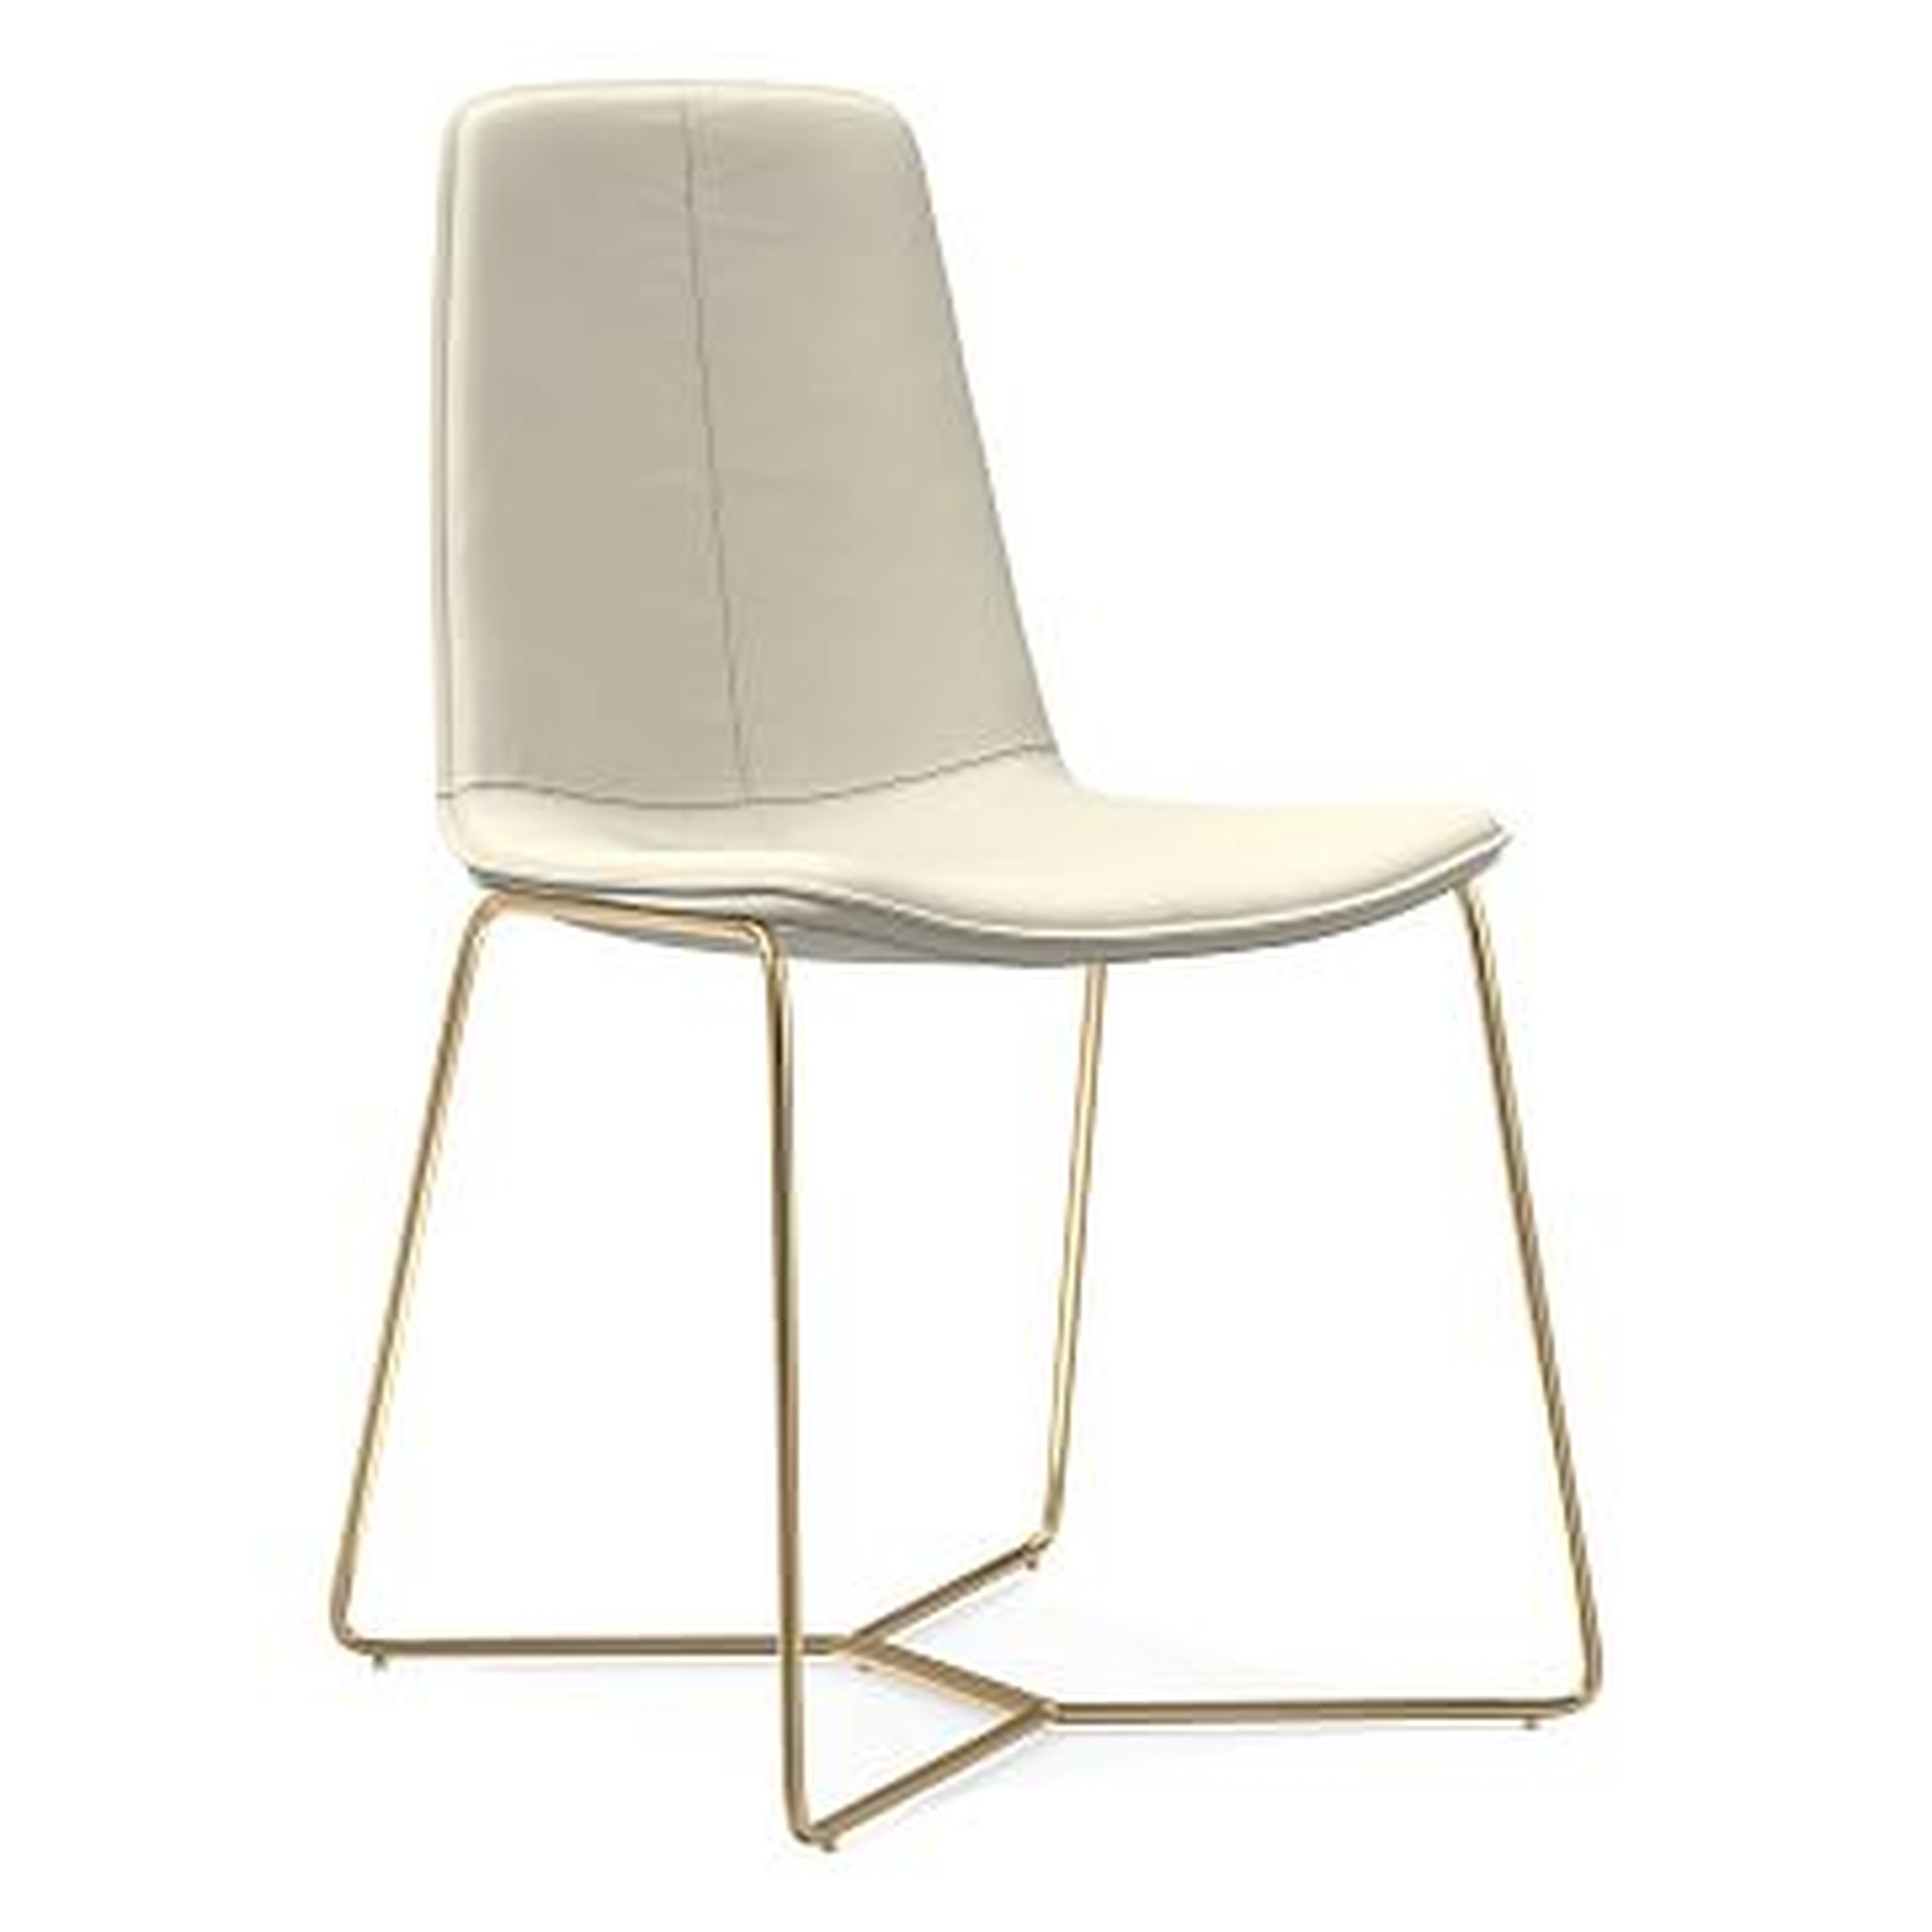 Slope Dining Chair, Vegan Leather, Snow, Antique Brass - West Elm